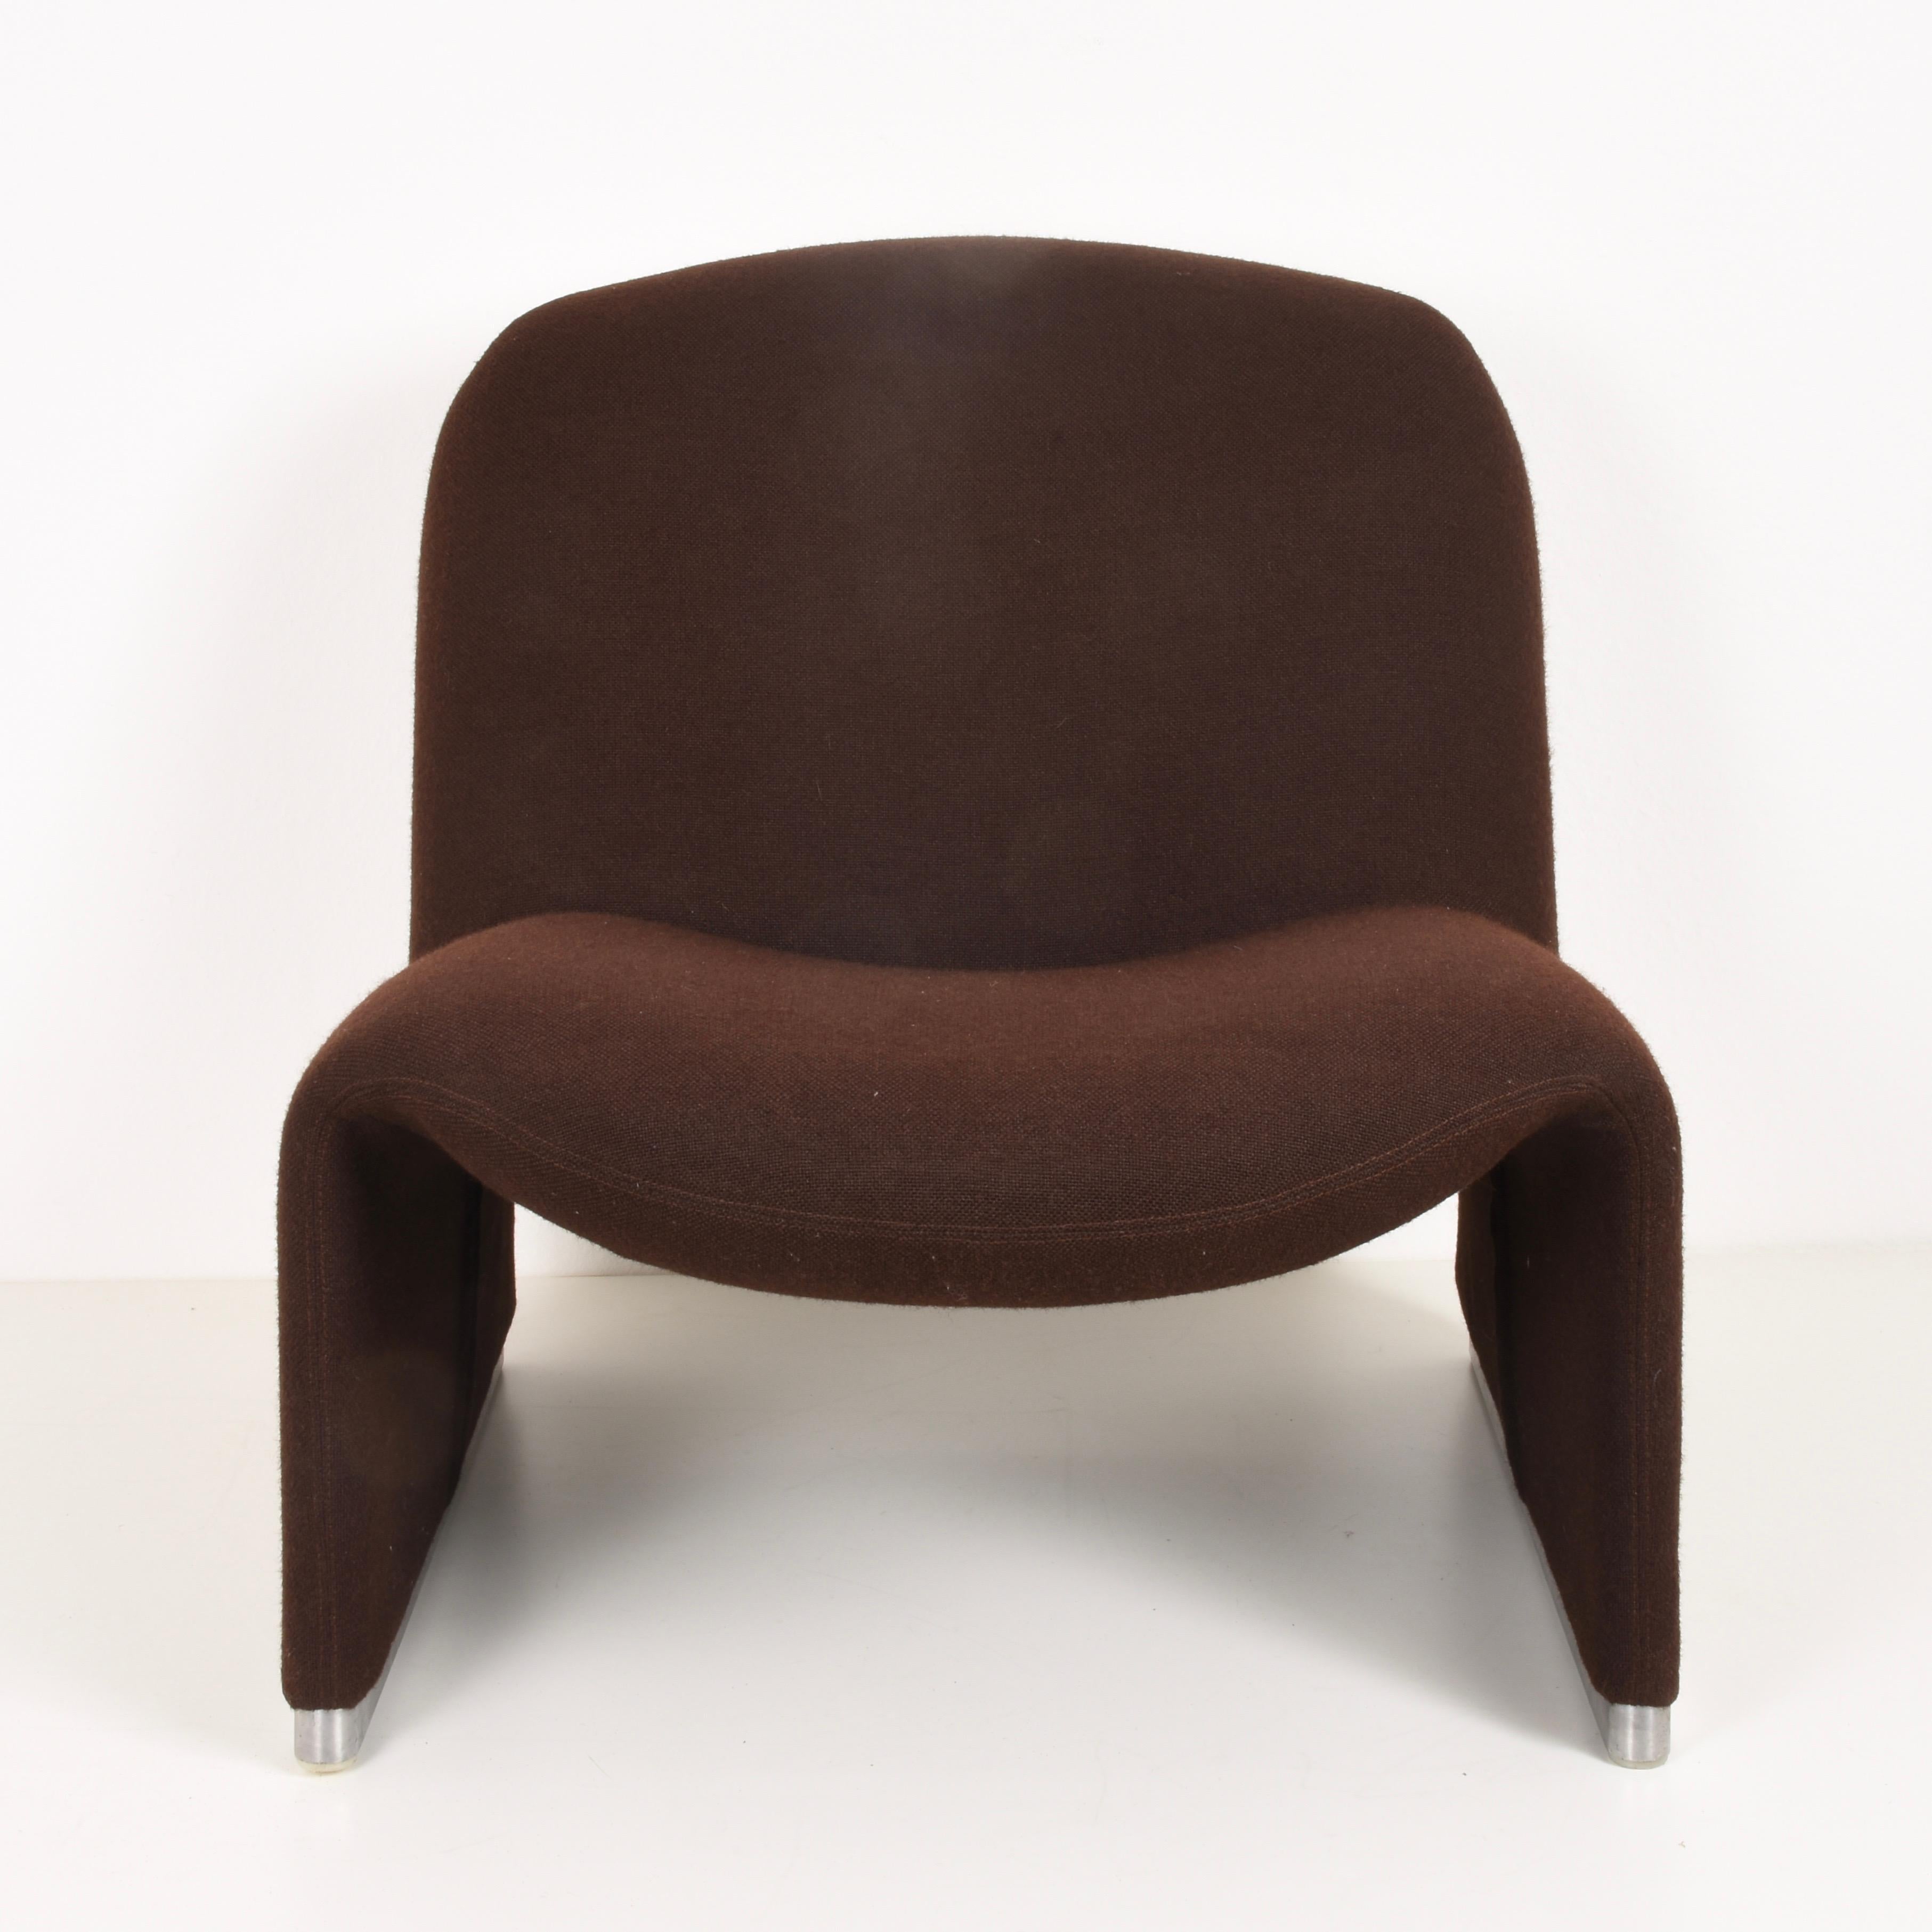 2 pieces available - Brown armchairs, Alky model by Giancarlo Piretti. Produced by Castelli in Italy in the 70s
Very comfortable. Original brown fabric. Made with foam. Aluminum base Good condition.
Marked on the bottom